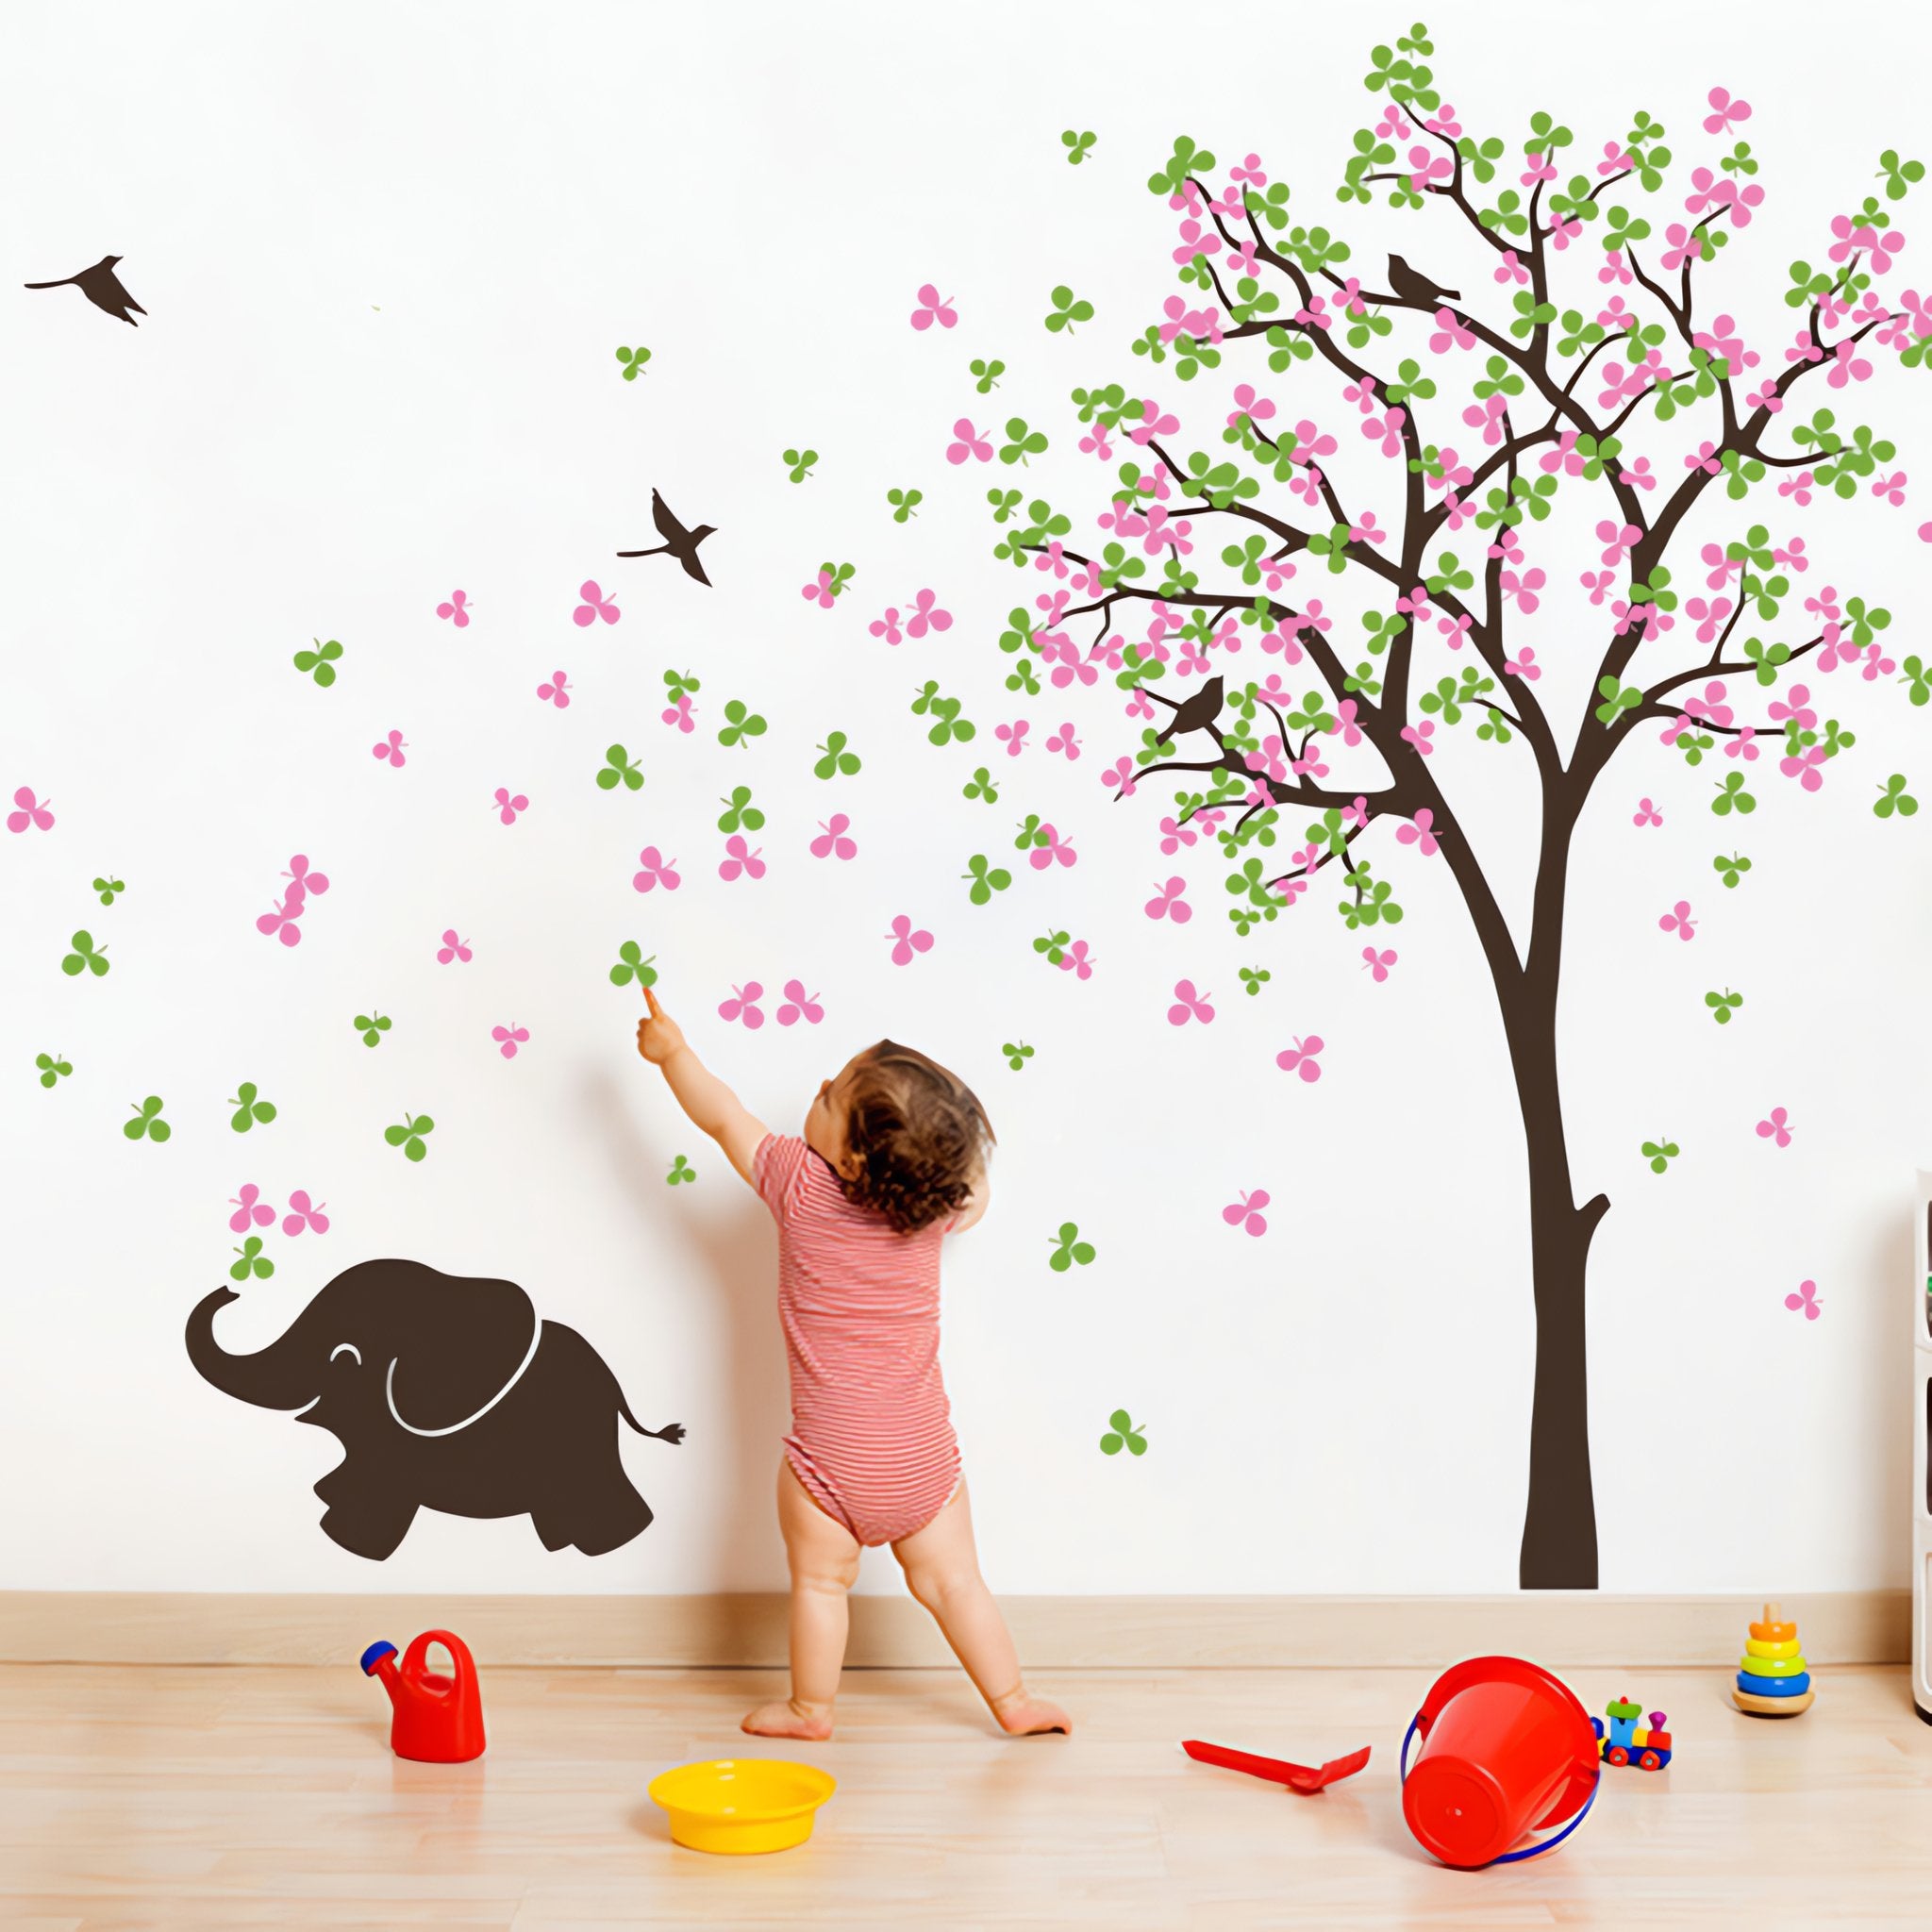 Tree wall sticker with a baby elephant and birds in a nursery with a baby playing and toys.